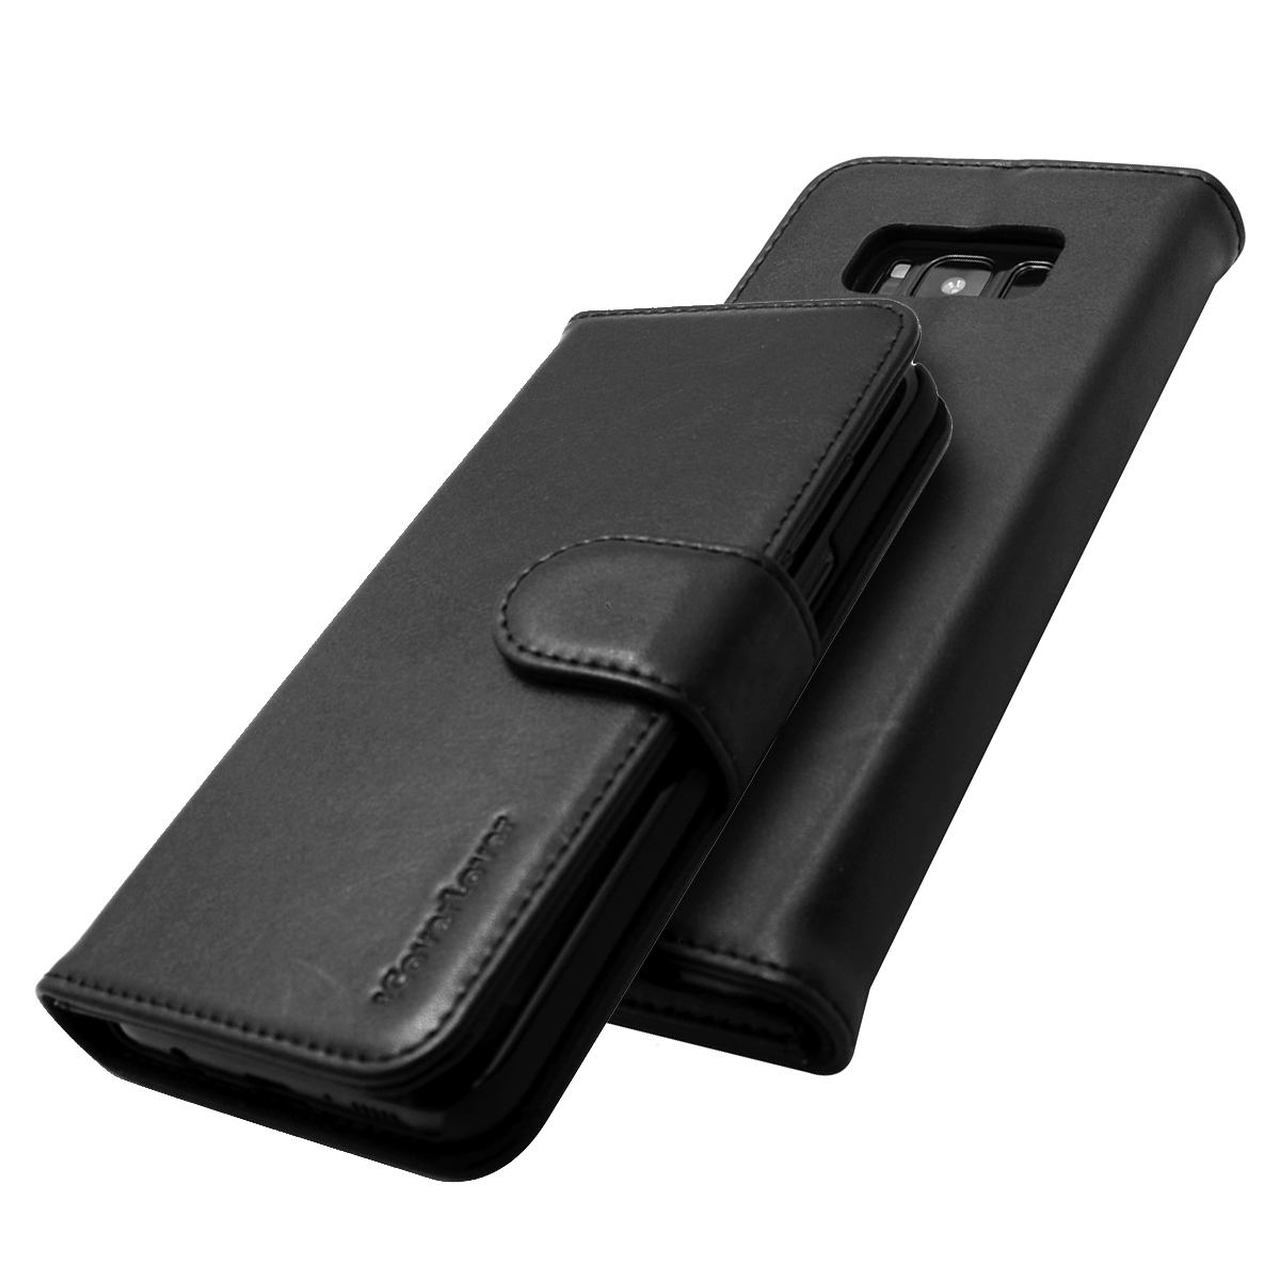 Samsung Galaxy S8 Case iCoverLover Black Genuine Leather Folio Wallet Cover